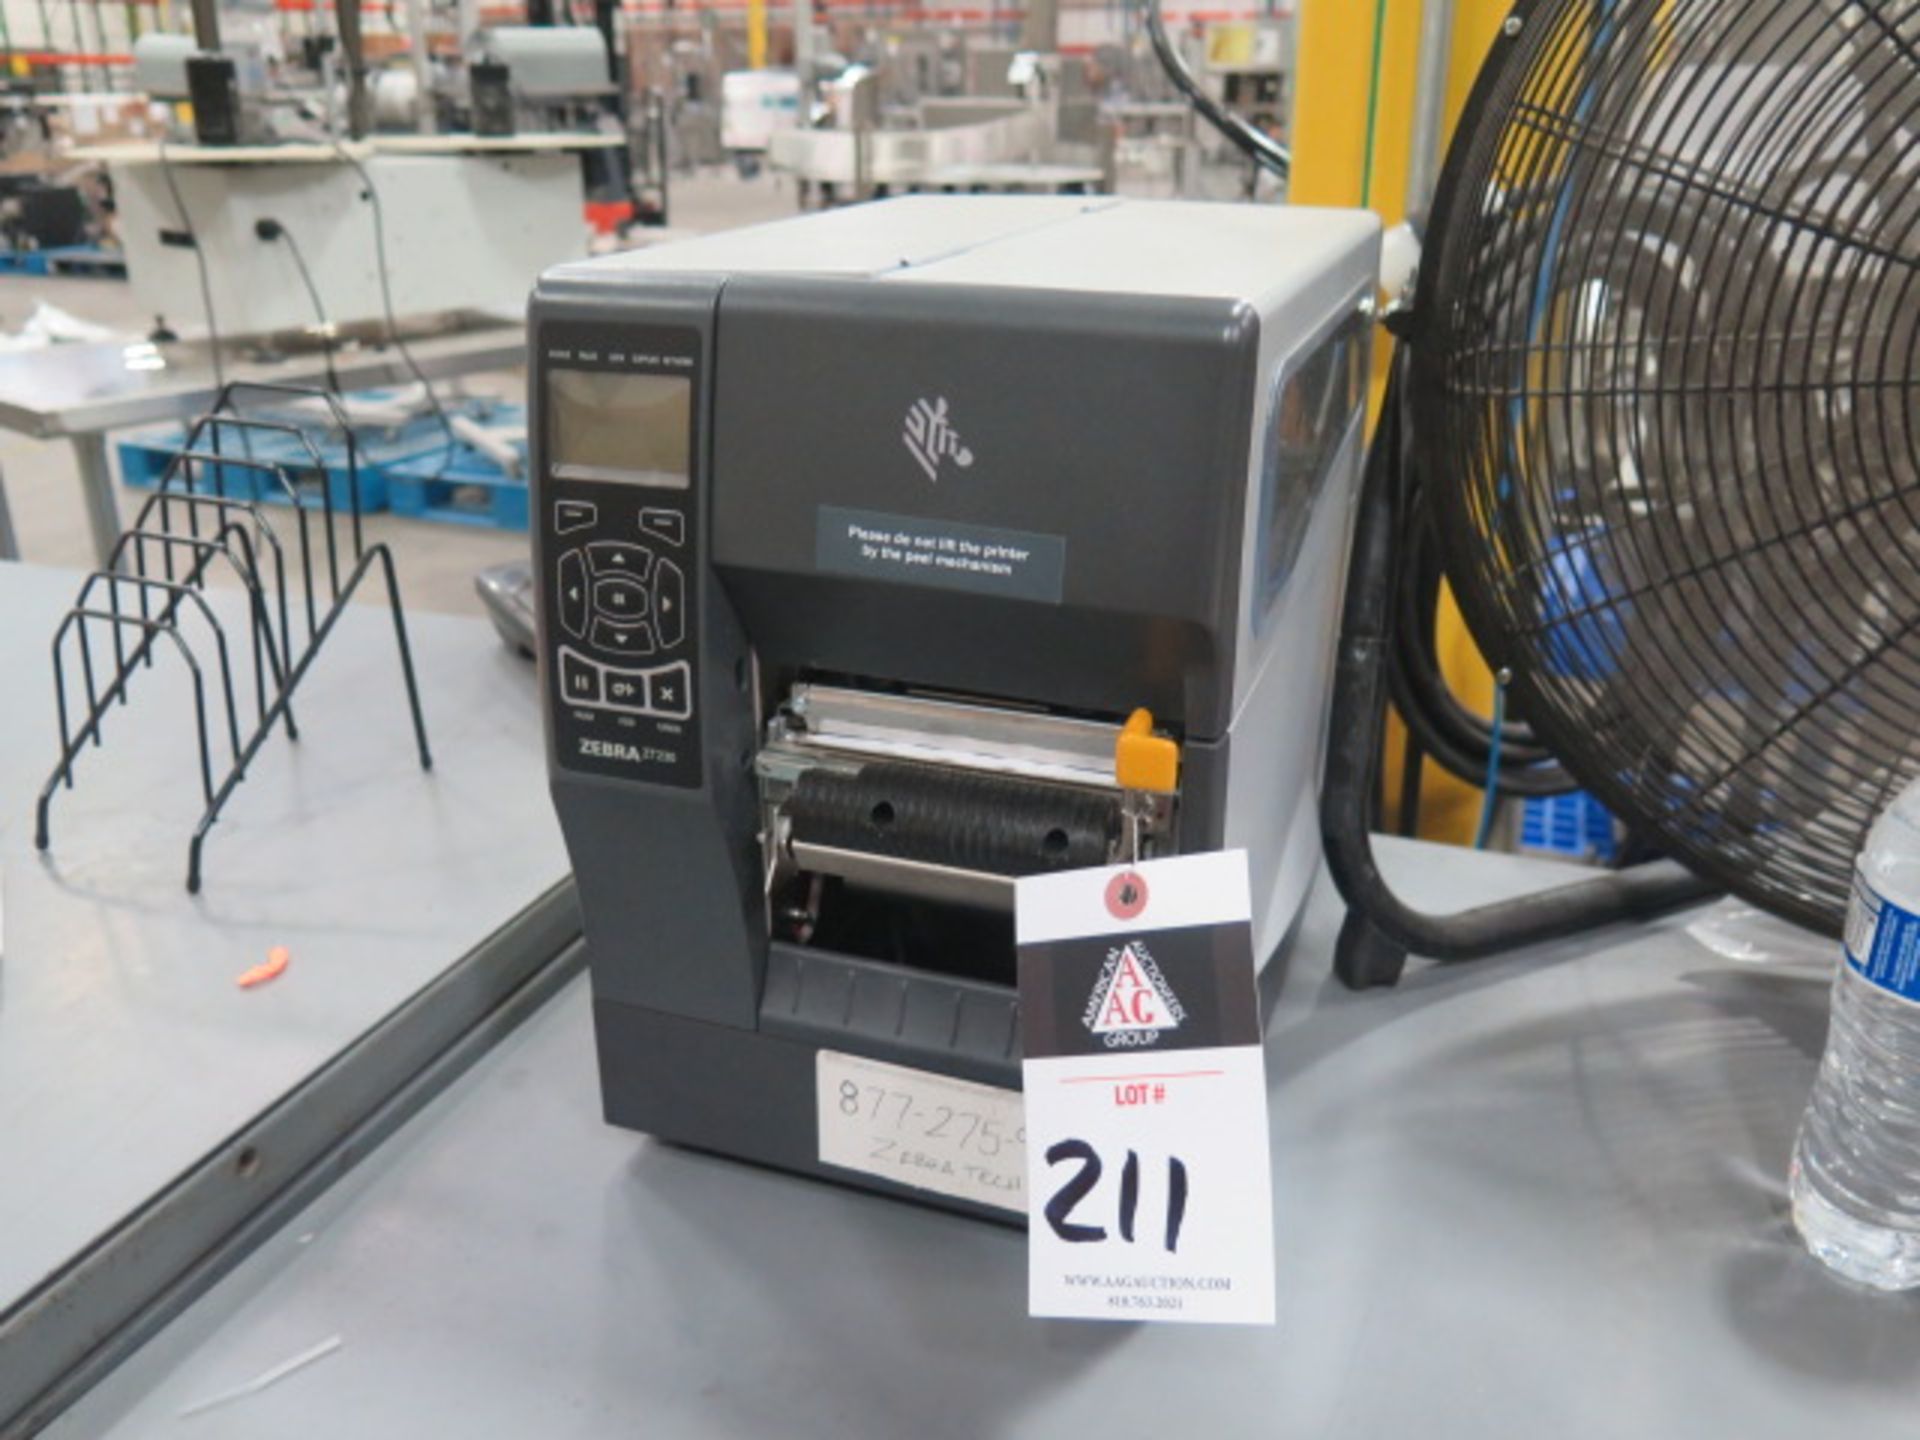 Zebra ZT230 Label Printer and Brother Printer (SOLD AS-IS - NO WARRANTY) - Image 2 of 5